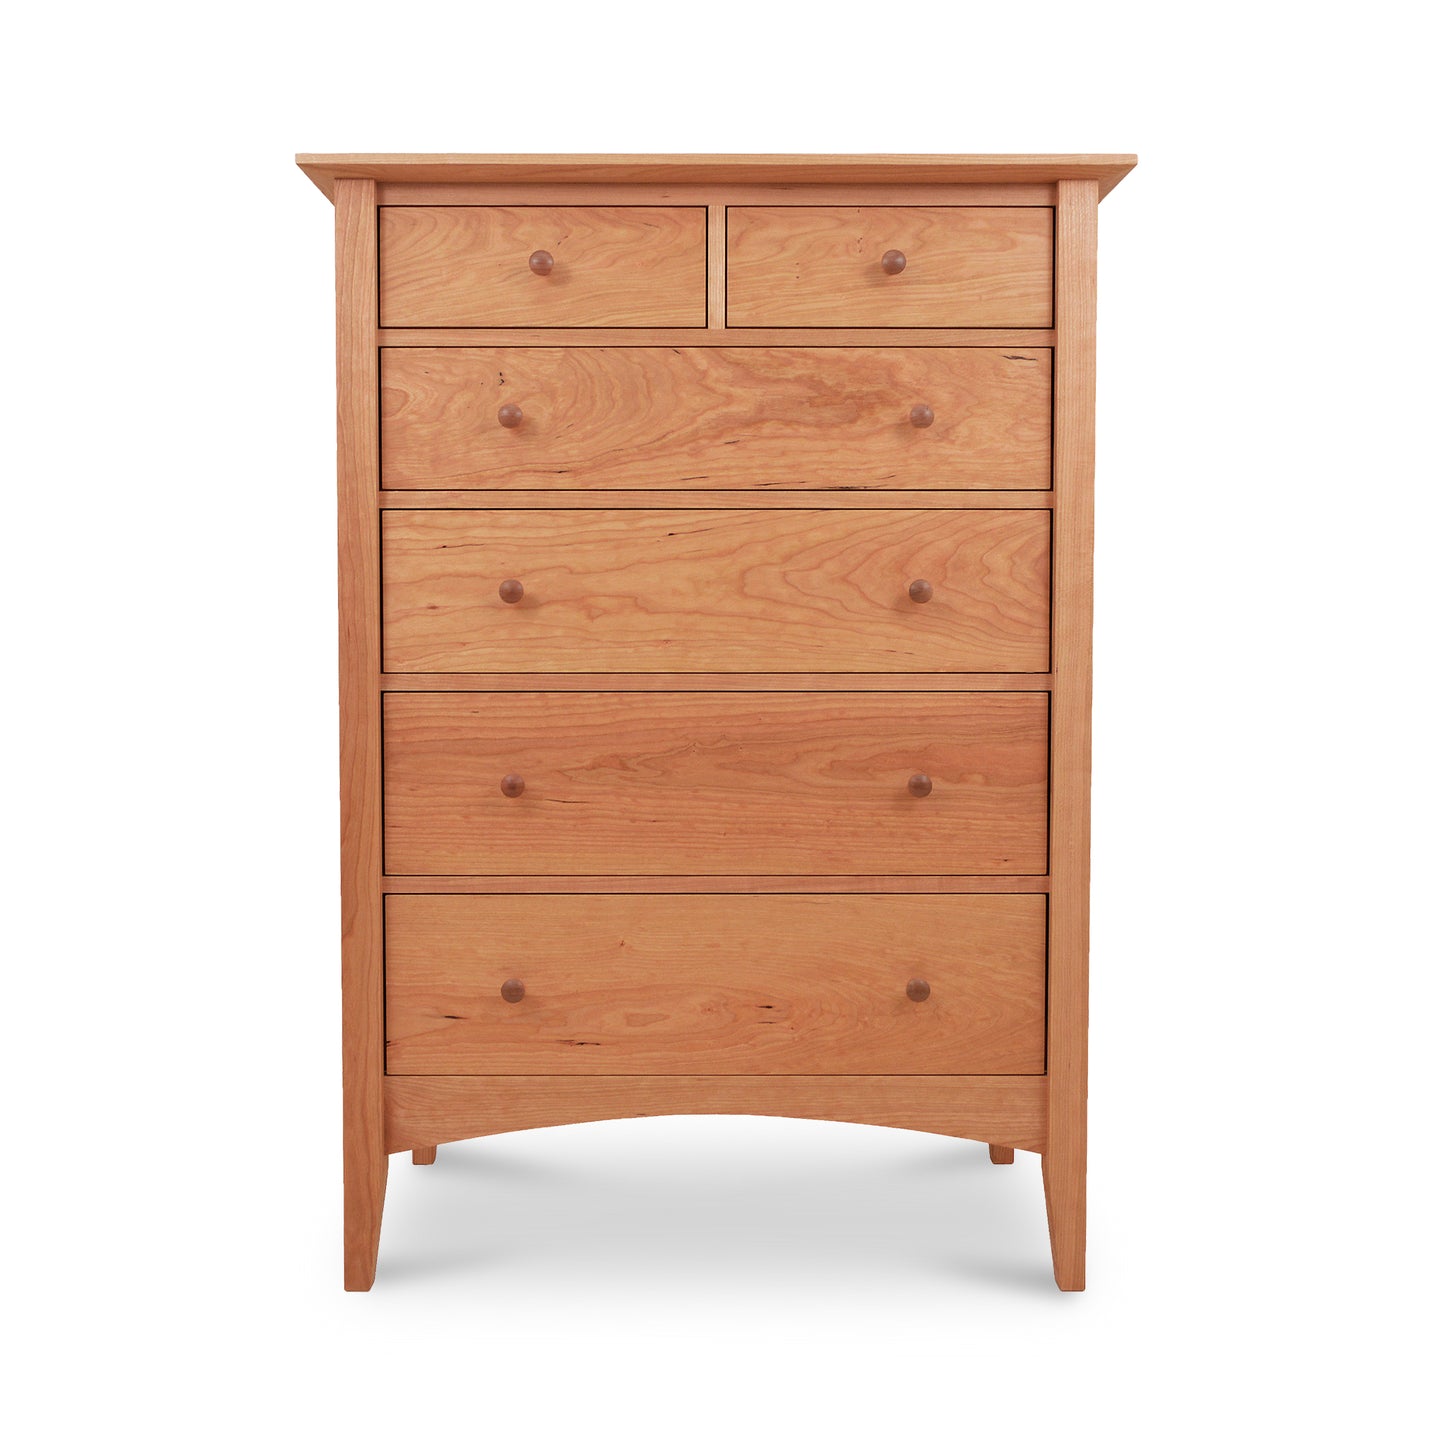 A American Shaker 6-Drawer Chest from Maple Corner Woodworks with six drawers, featuring a natural cherry finish and round knobs. The chest stands upright on four slightly curved legs, isolated on a white background.